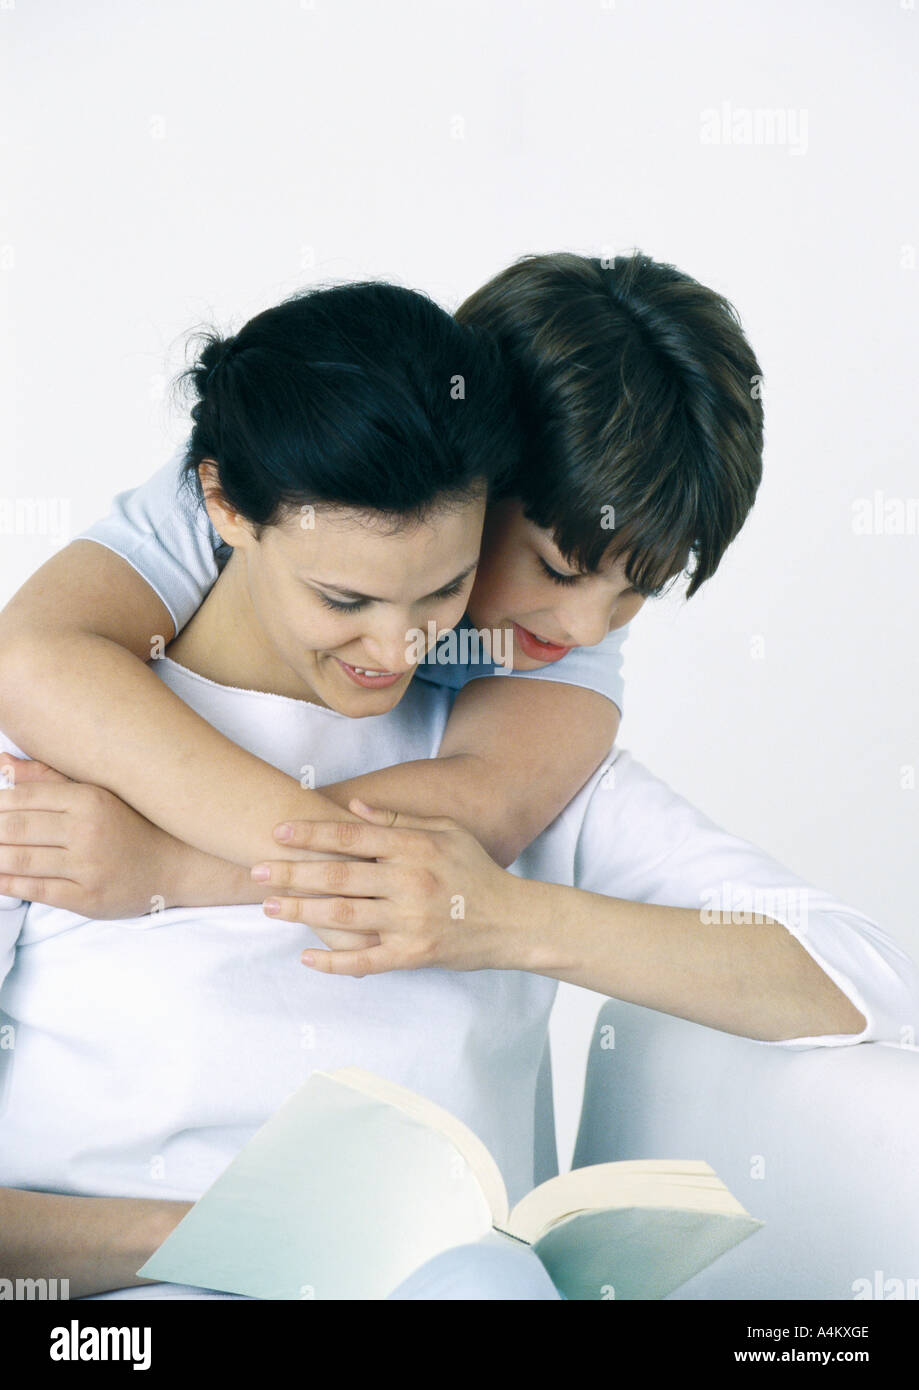 Woman and son reading book, boy with arms around woman, looking over her shoulder Stock Photo